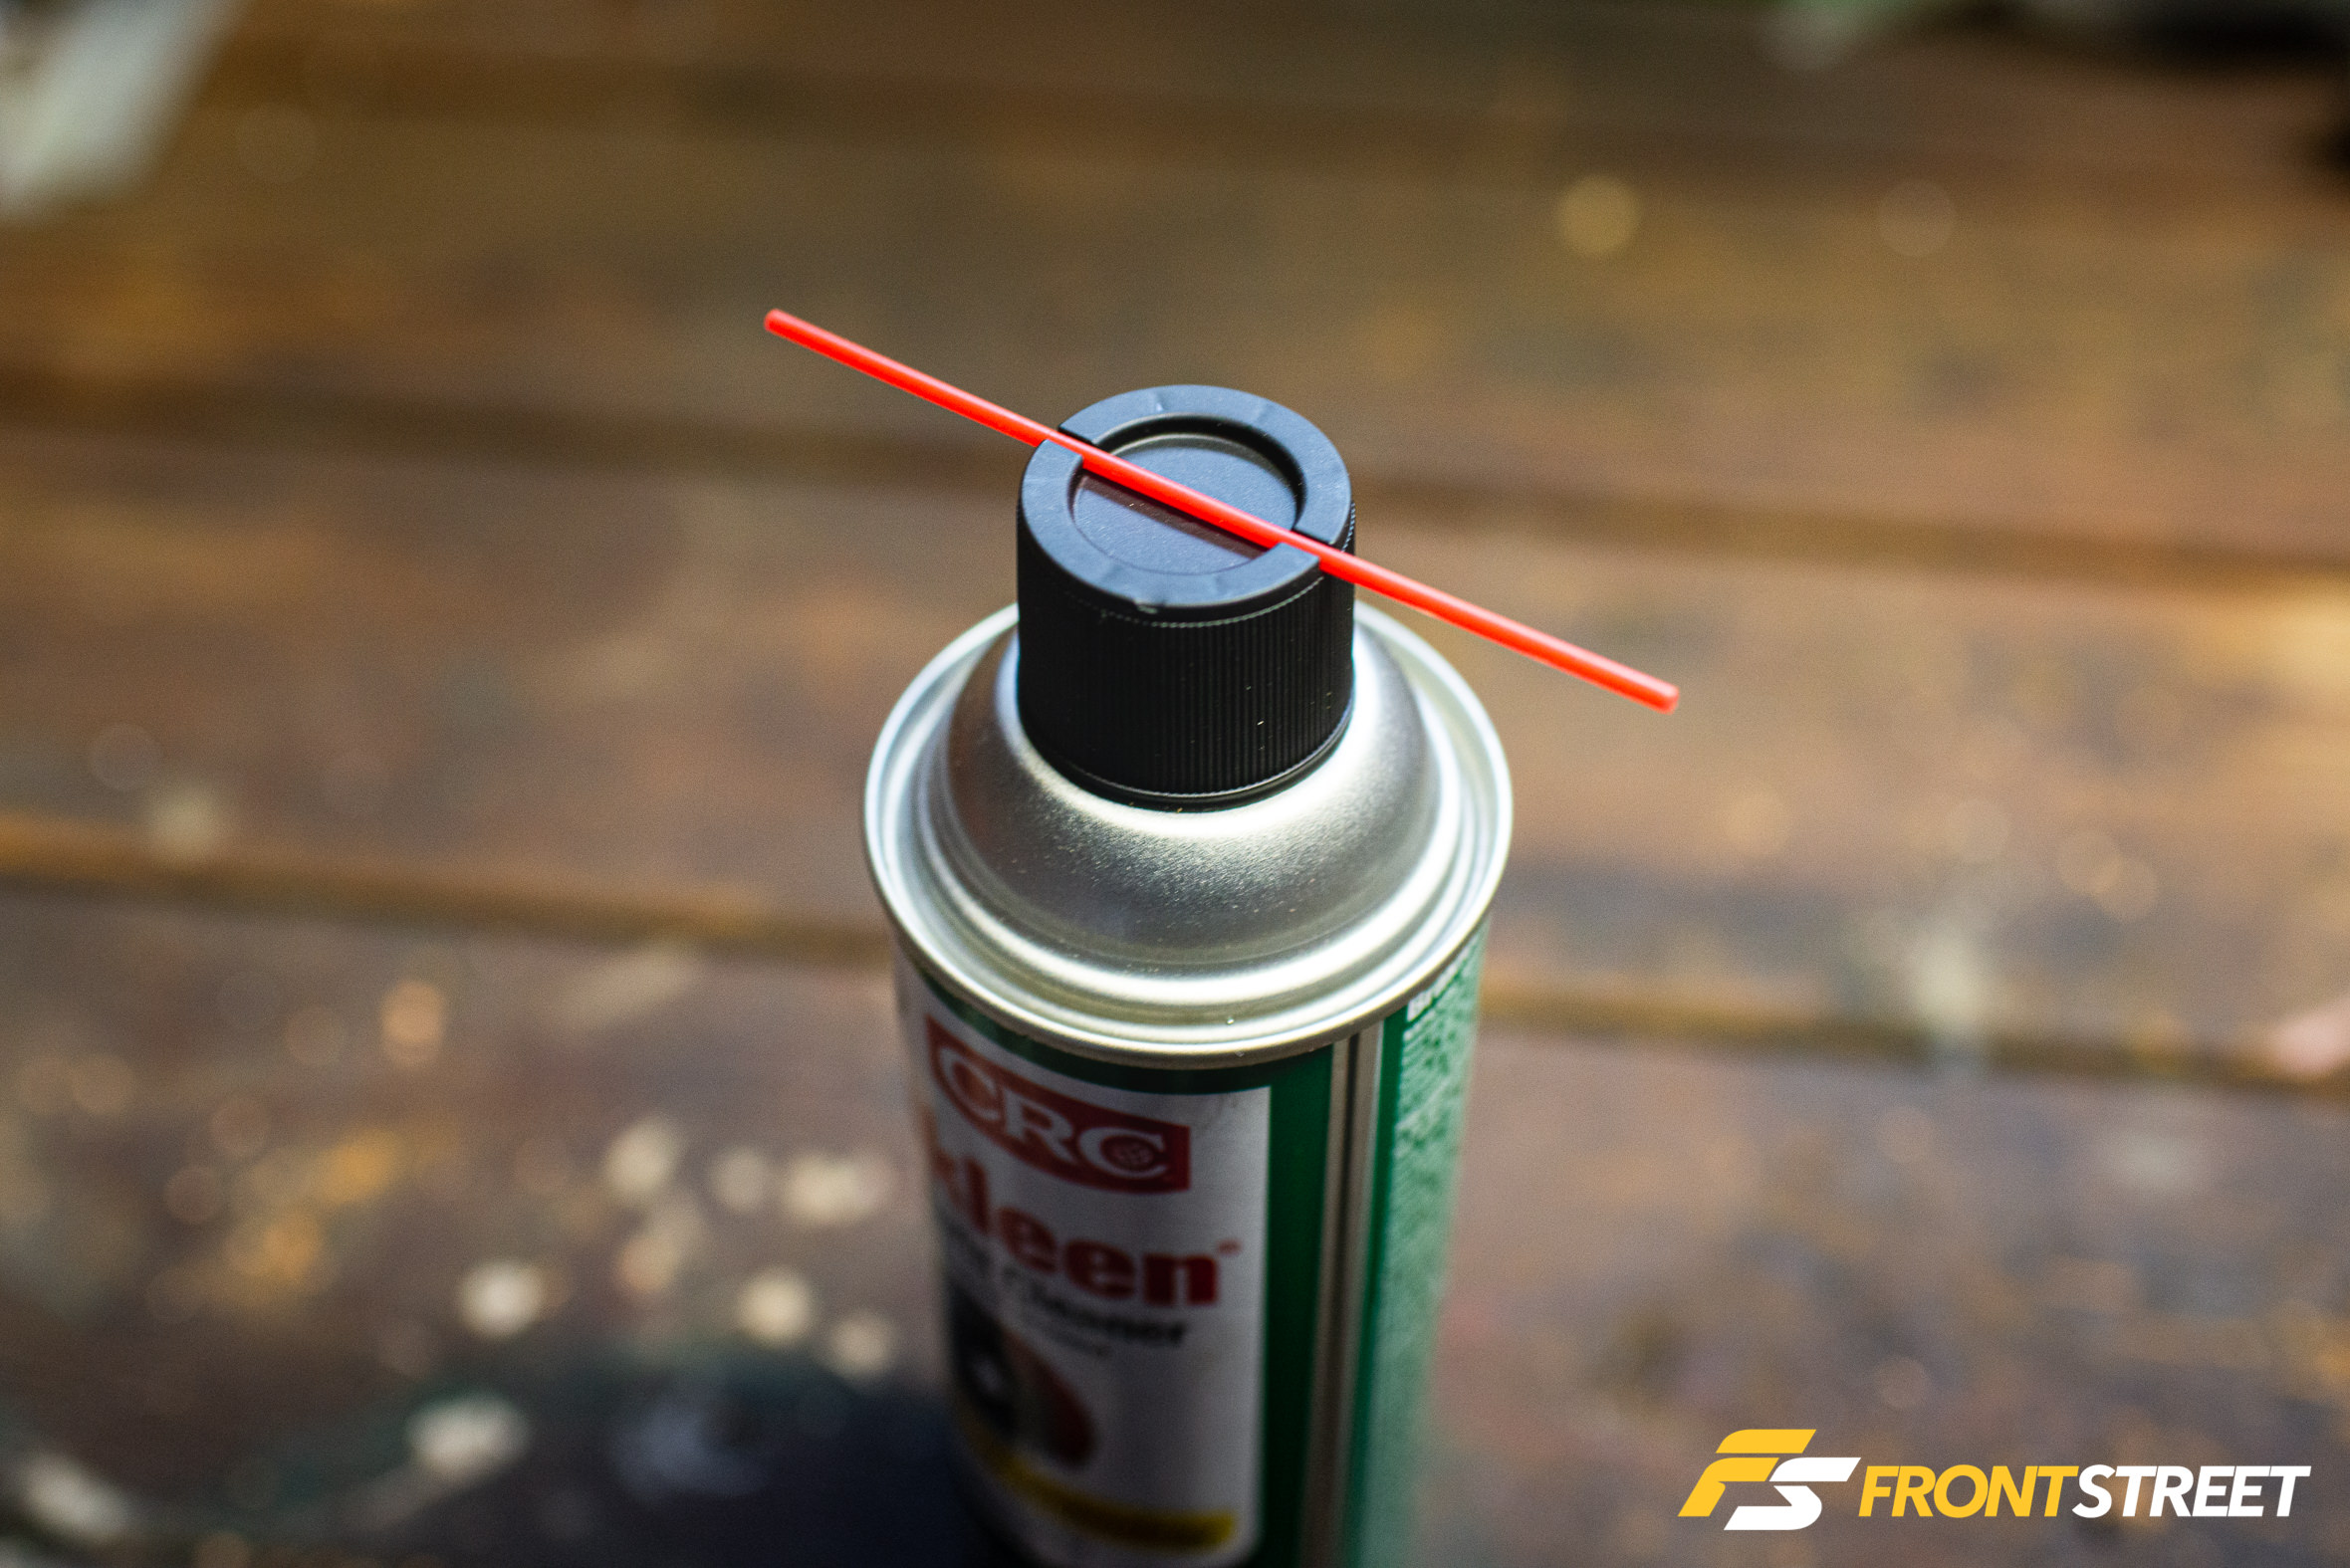 The More You Know: Five Garage Hacks That Turn You Into MacGyver